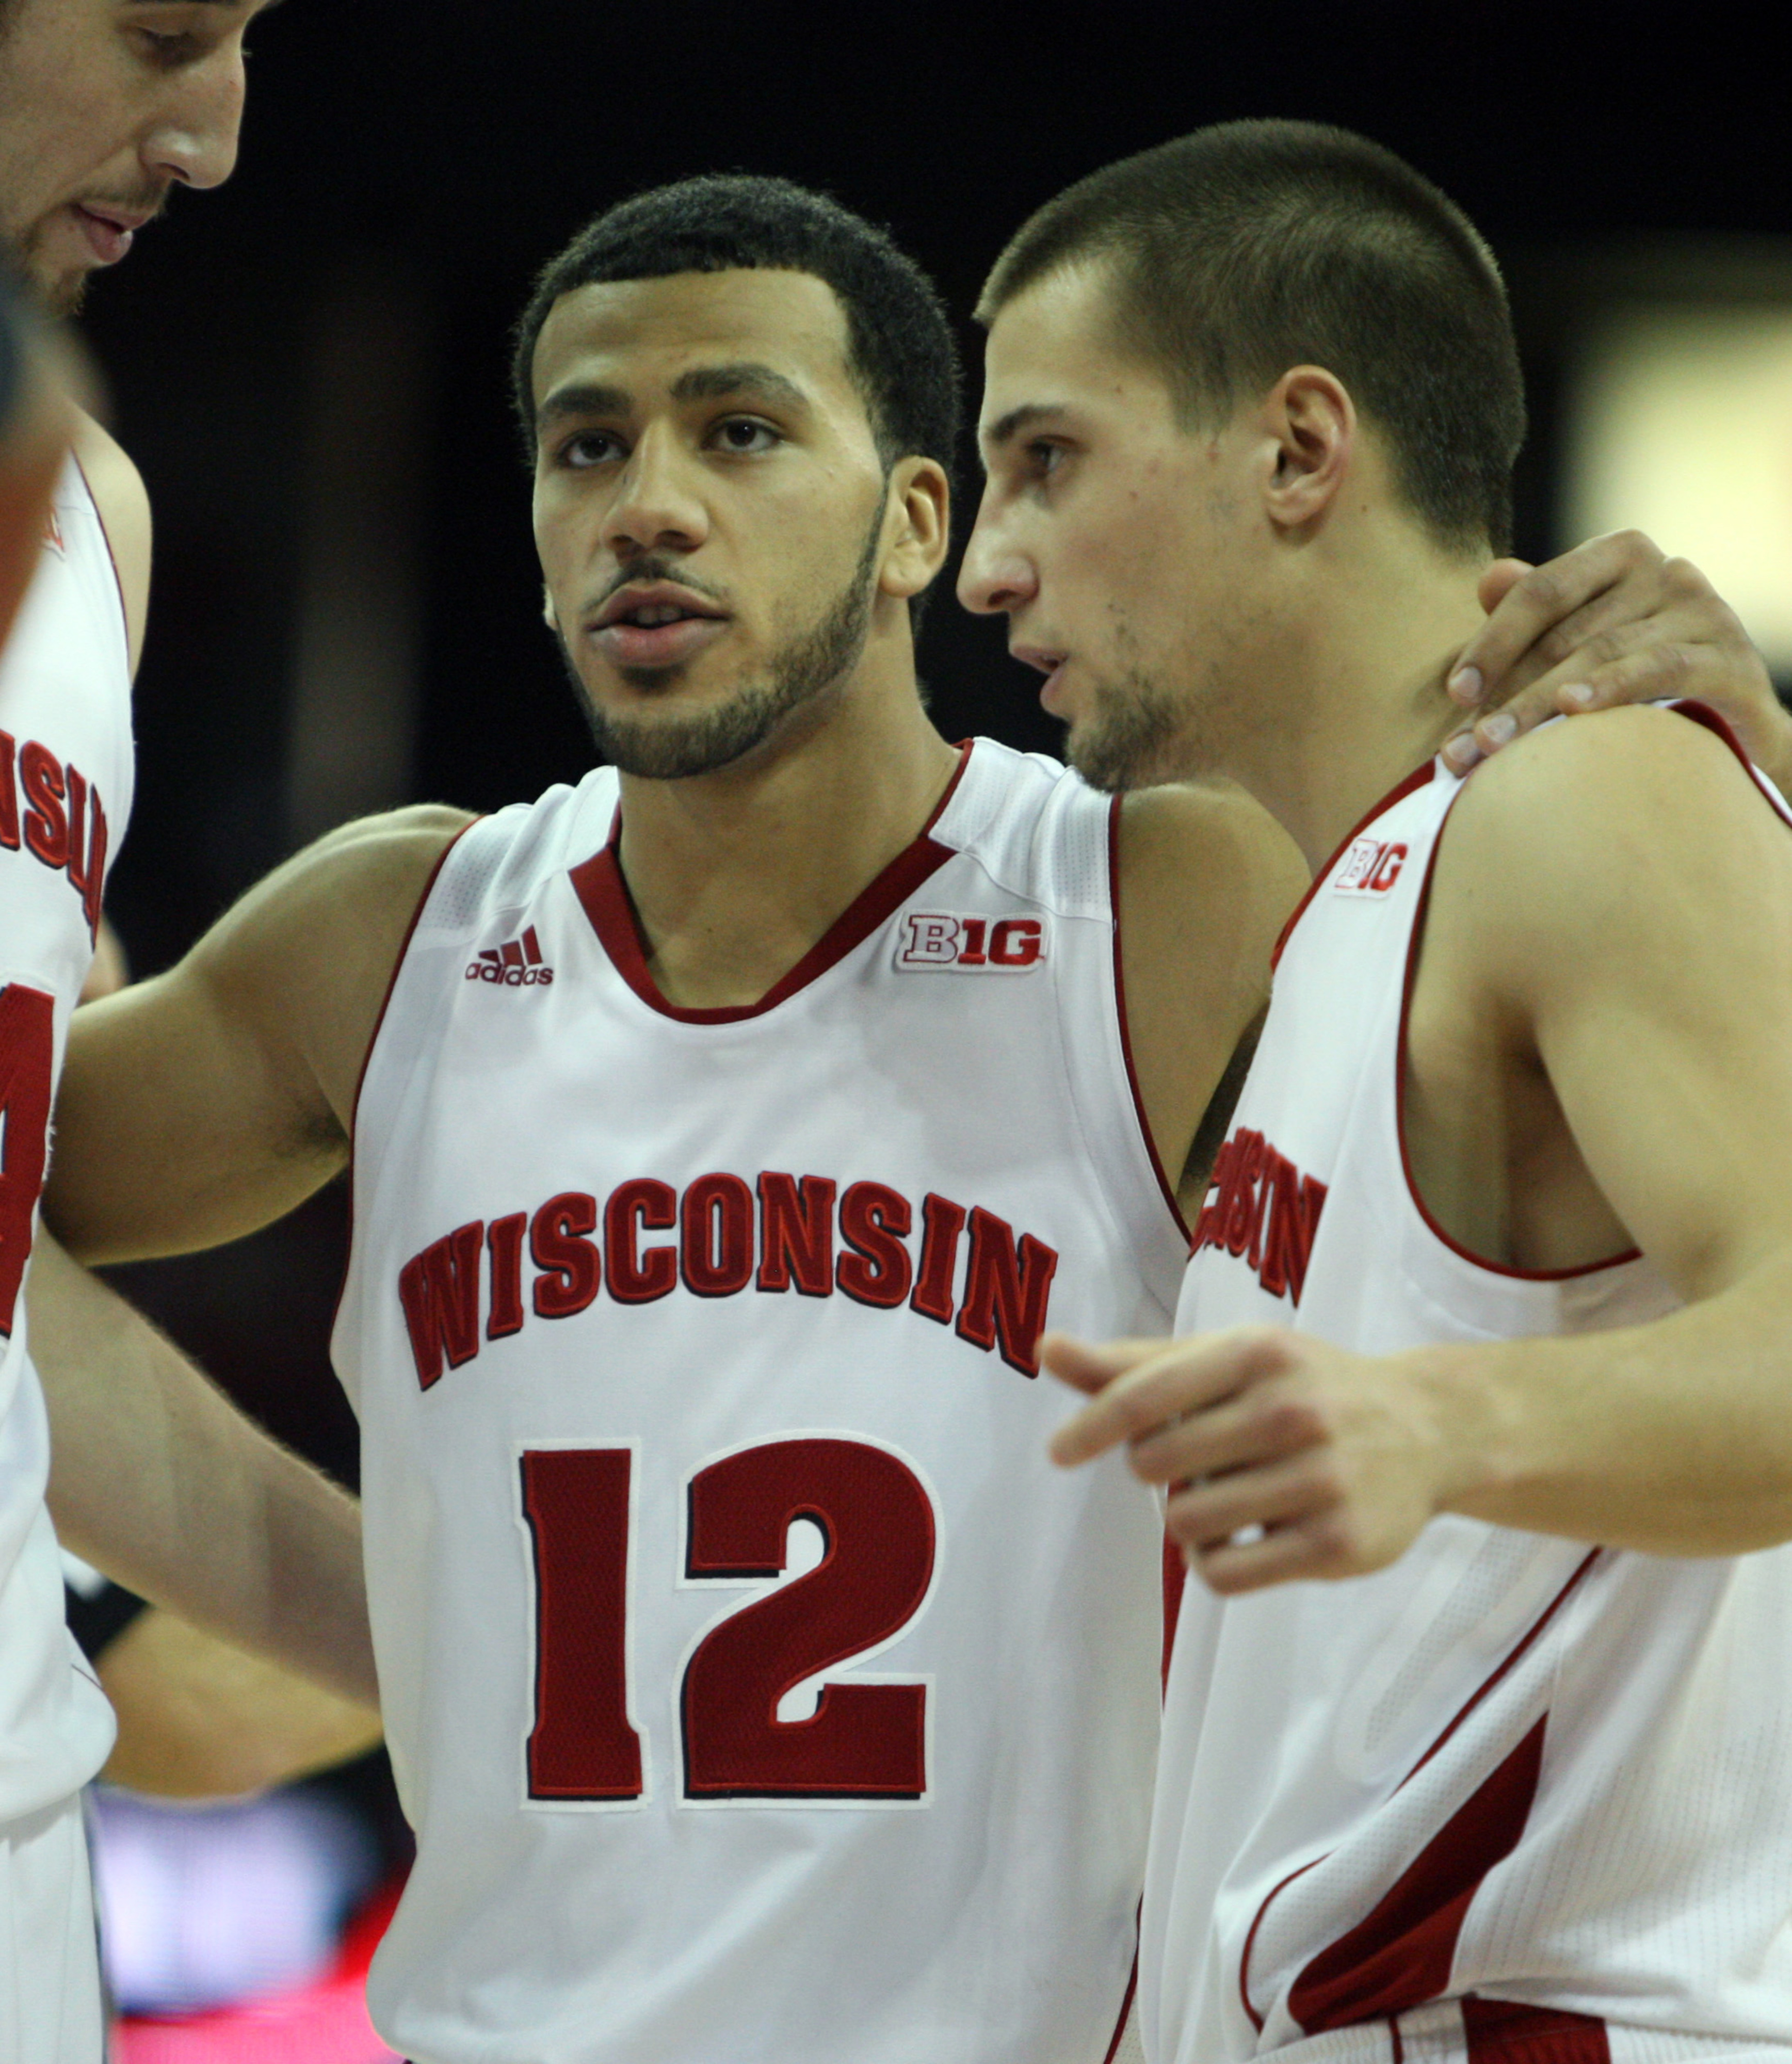 No one else needs to talk about the Badgers for Jackson, Brust, and Kaminsky to keep rolling on the hardwood.